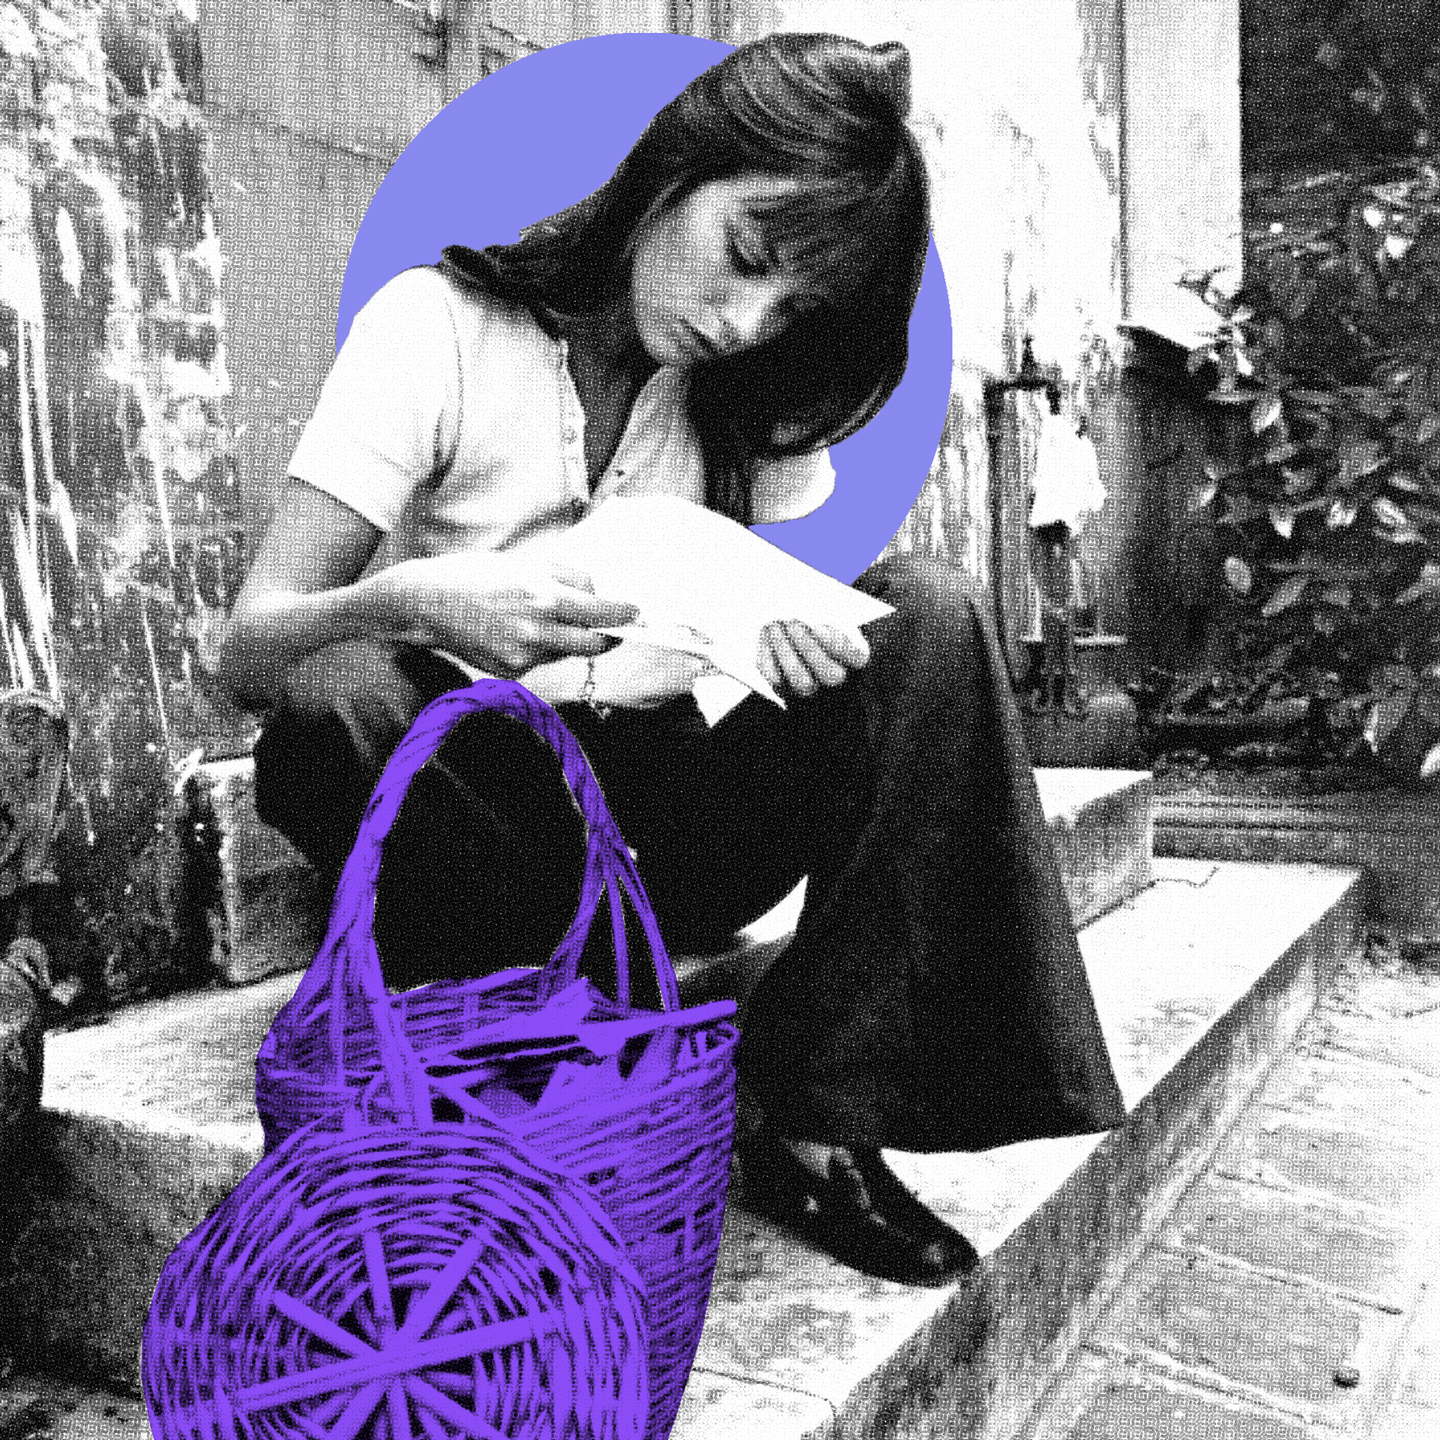 Birkin was a style icon long before the Hermès bag, she had already developed a signature style by wearing a straw basket as a handbag